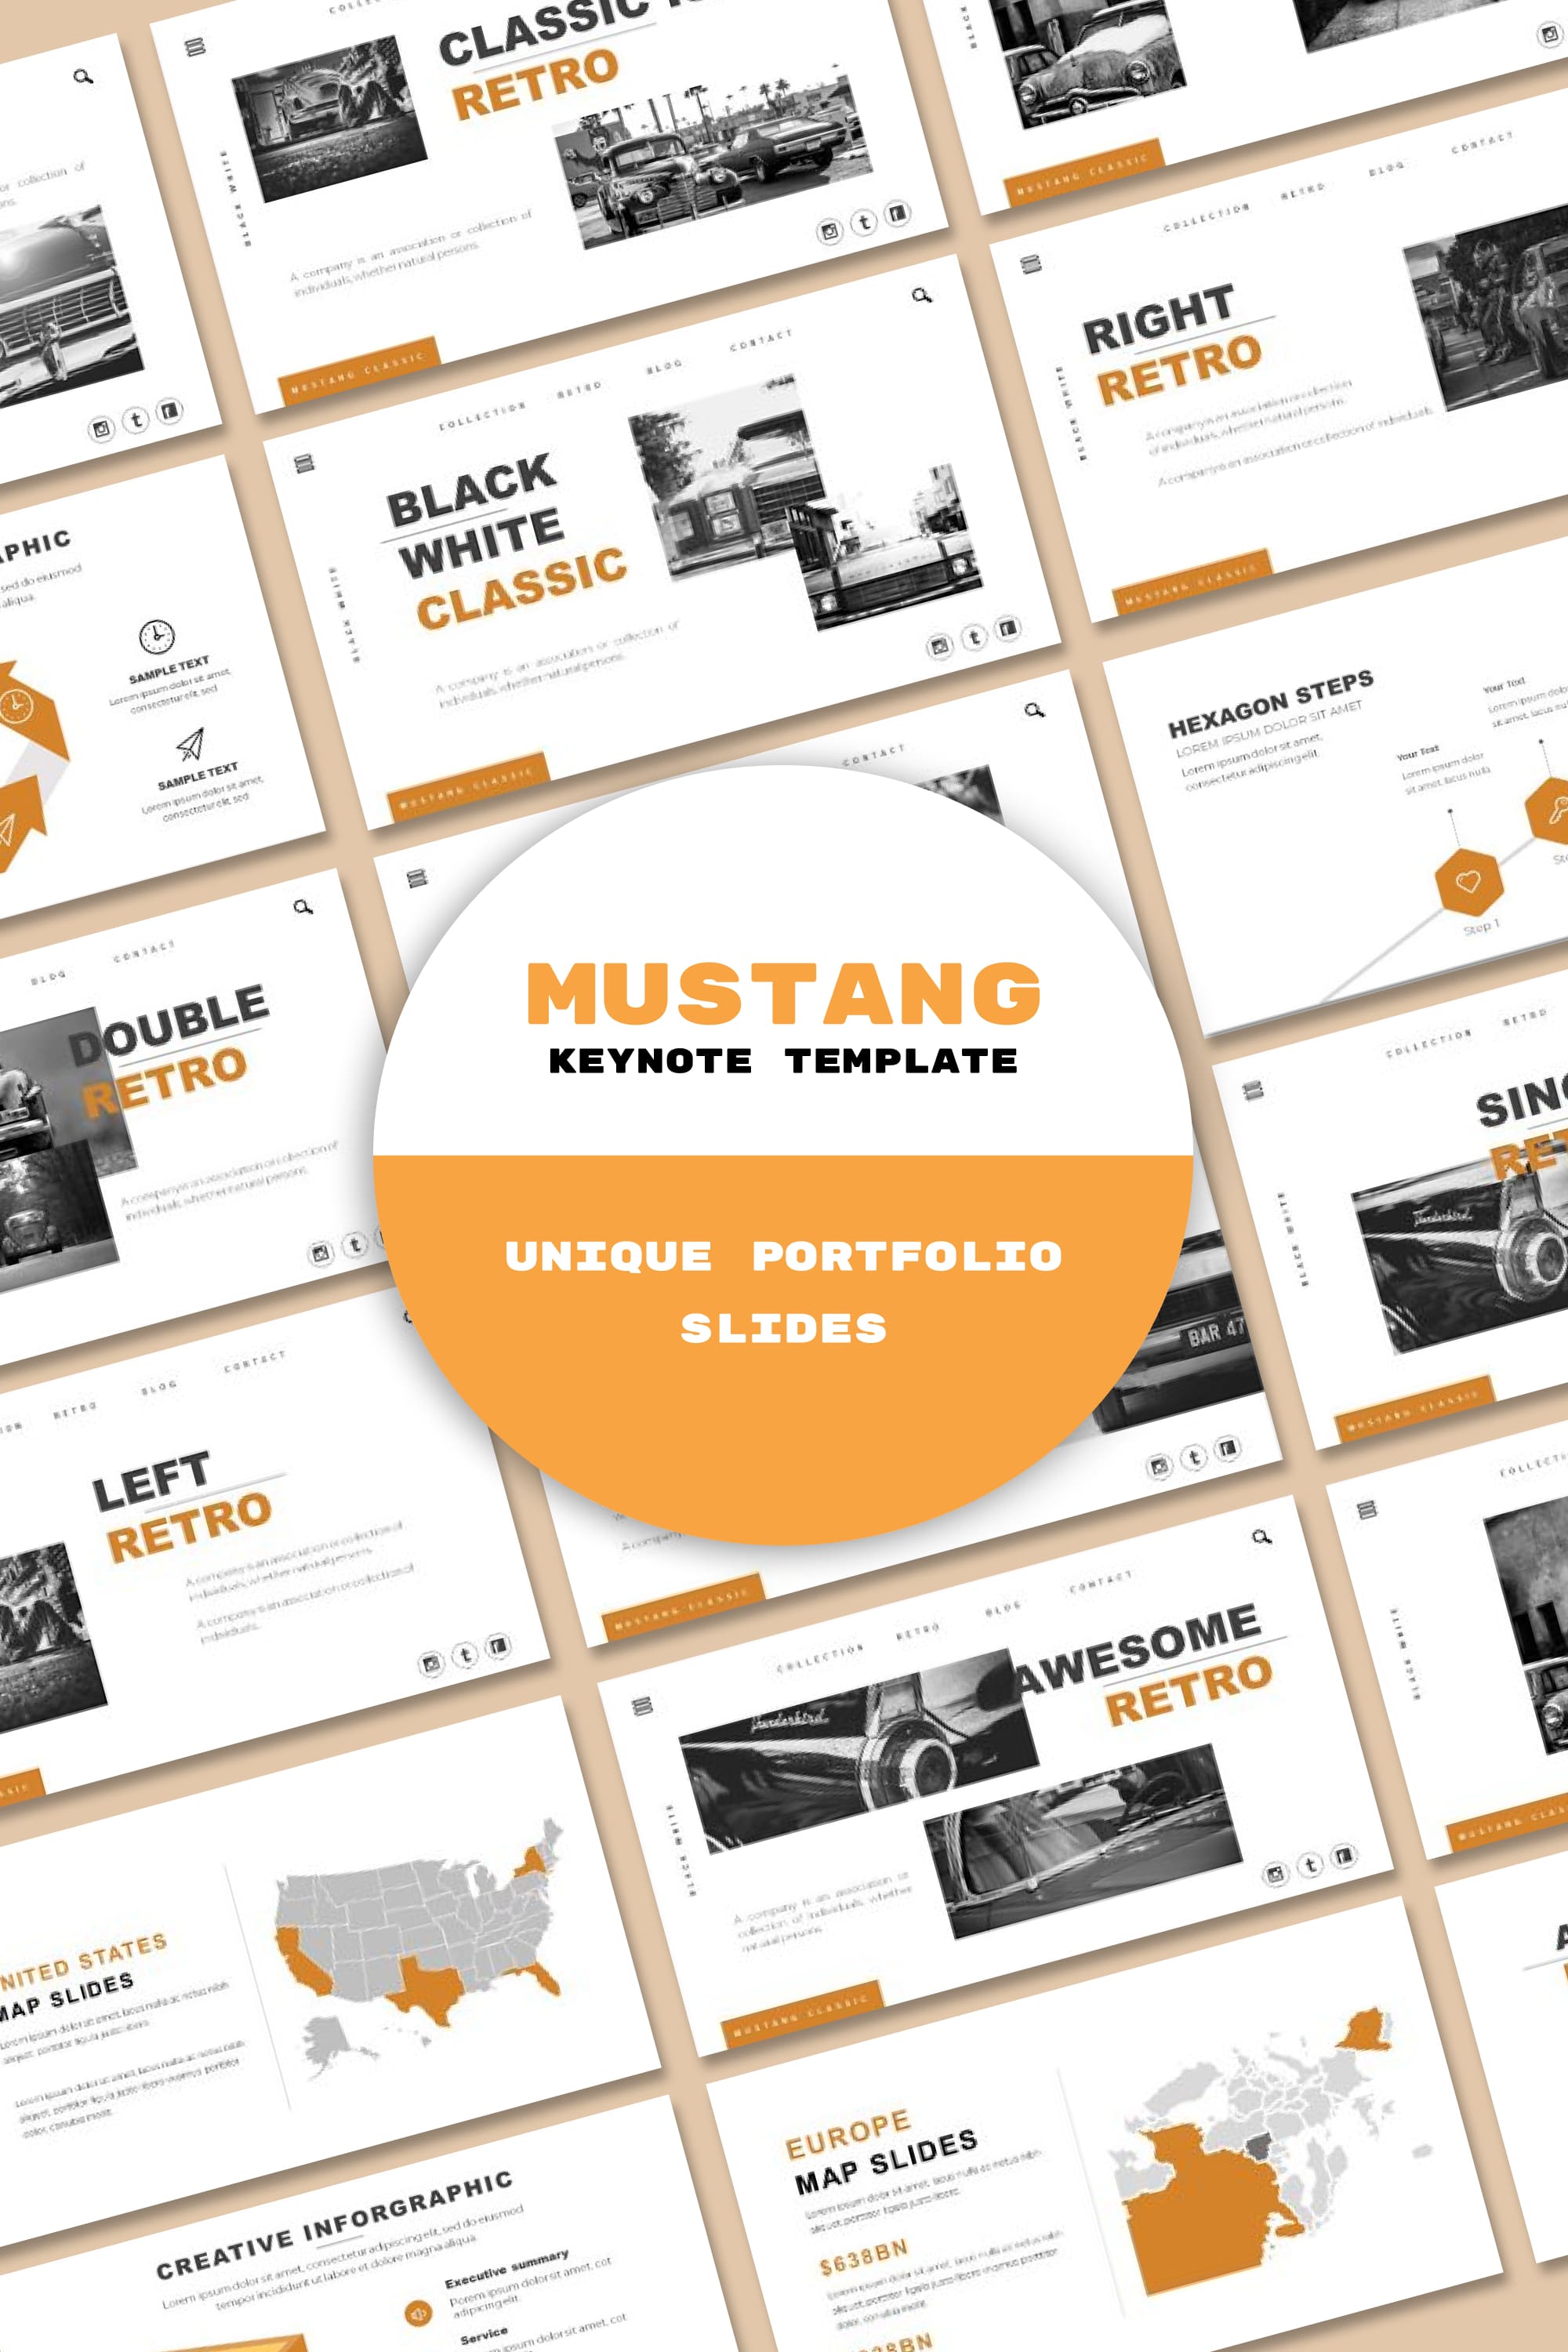 Mustang keynote template - pinterest image preview.